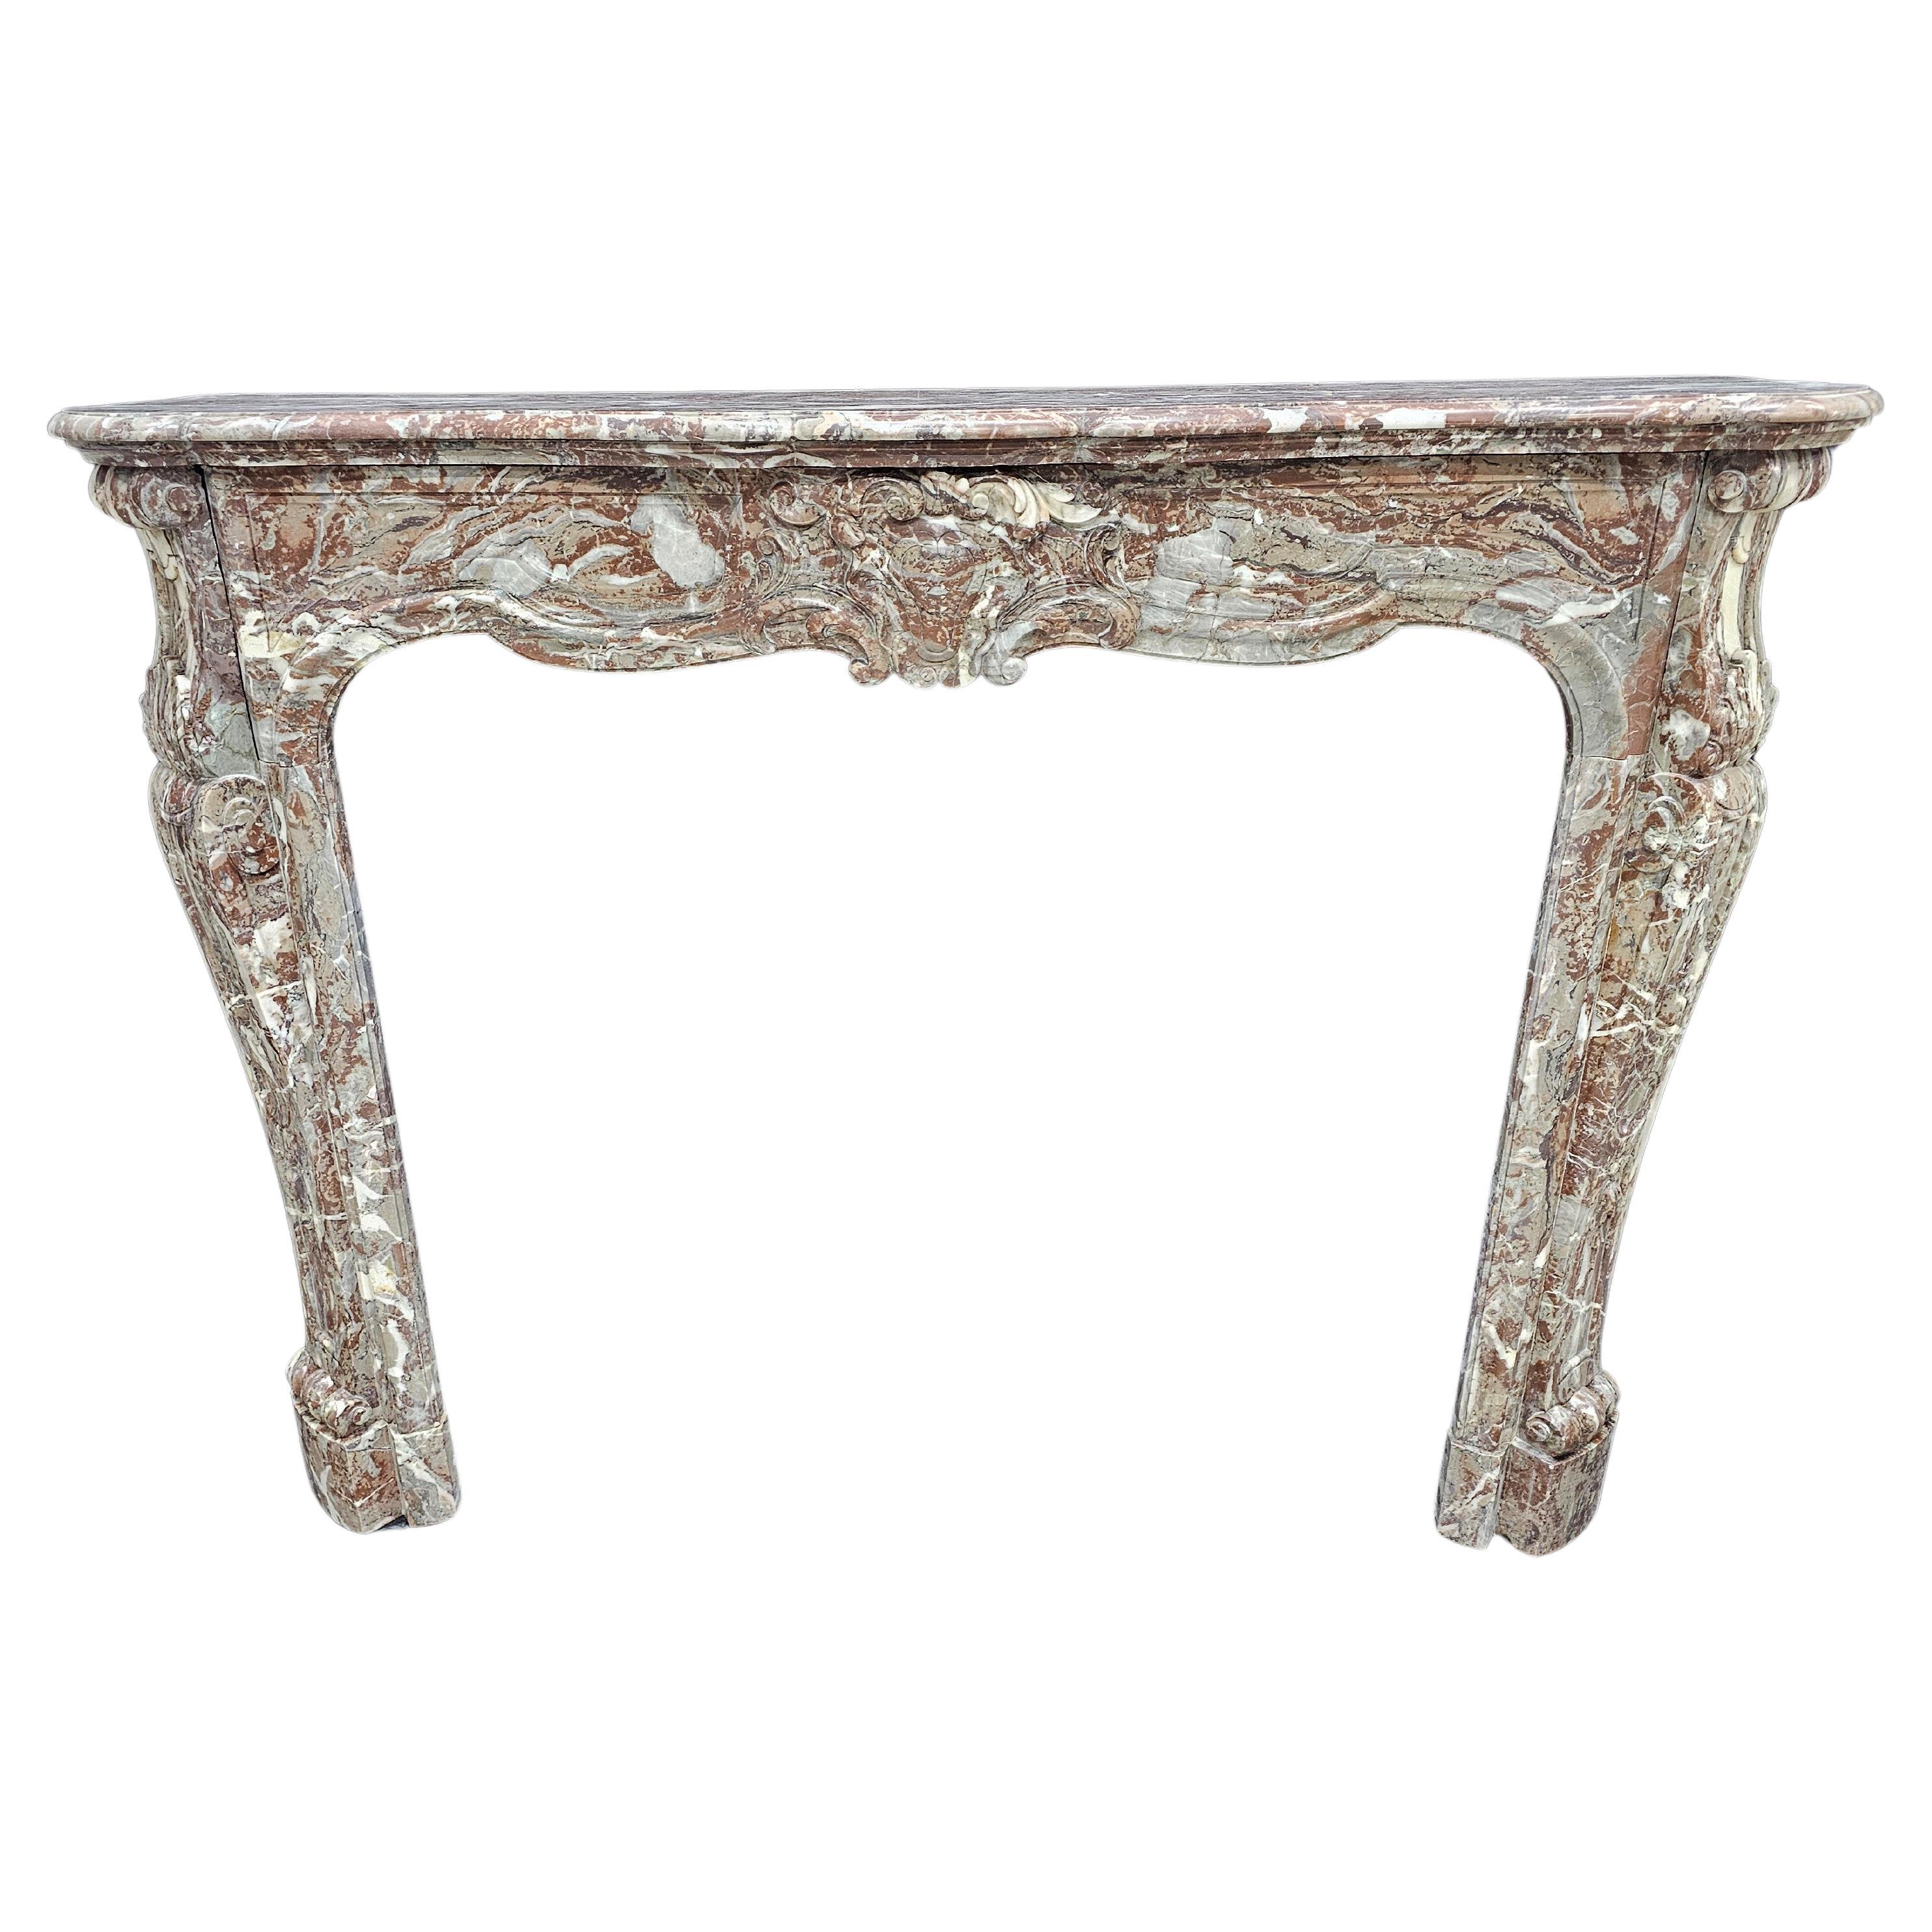 19th Century French Chimneypiece in Arabescato Orobico Rosso